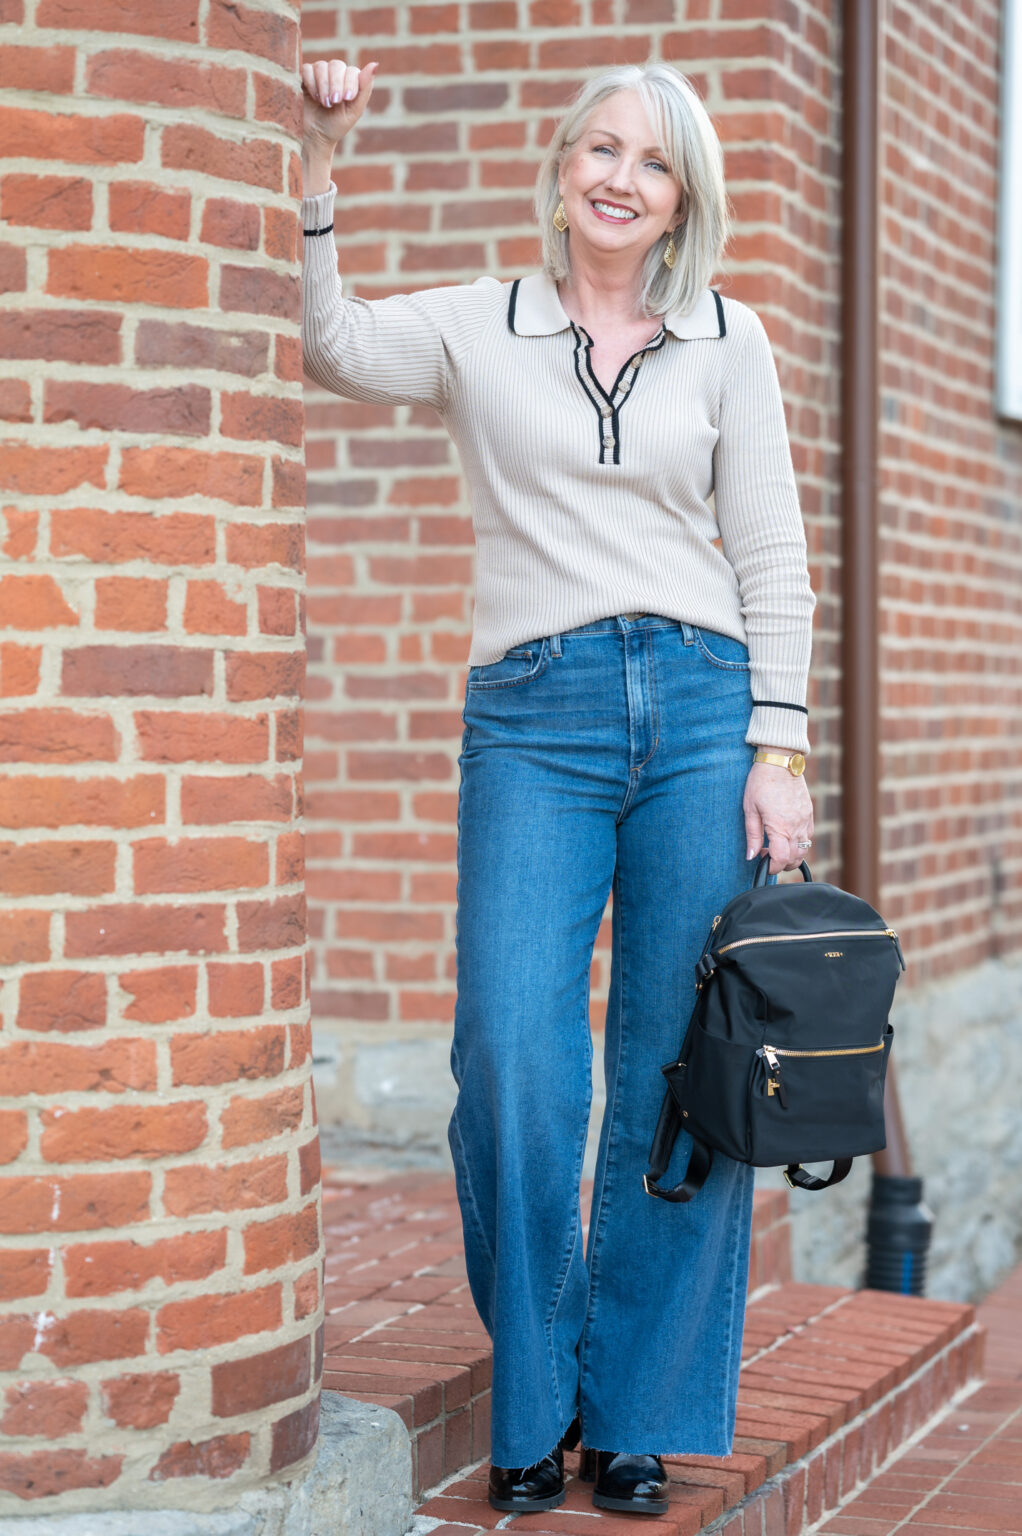 Styling a Modern Polo Shirt 3 Ways for Fall - Dressed for My Day